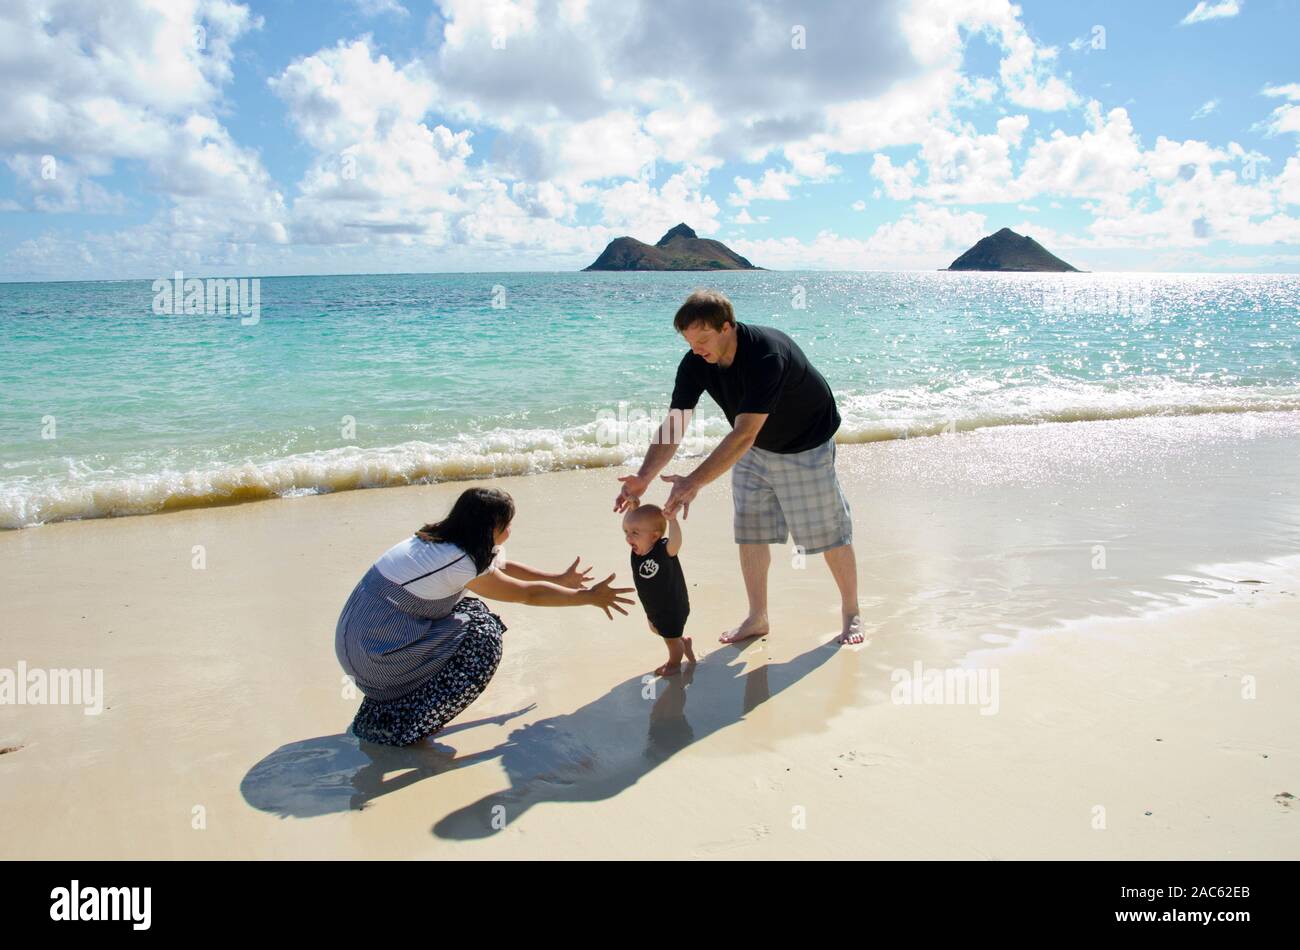 A family of three playing on Waimanalo Beach, O'ahu, with the Mokulua Islands in the distance. Stock Photo